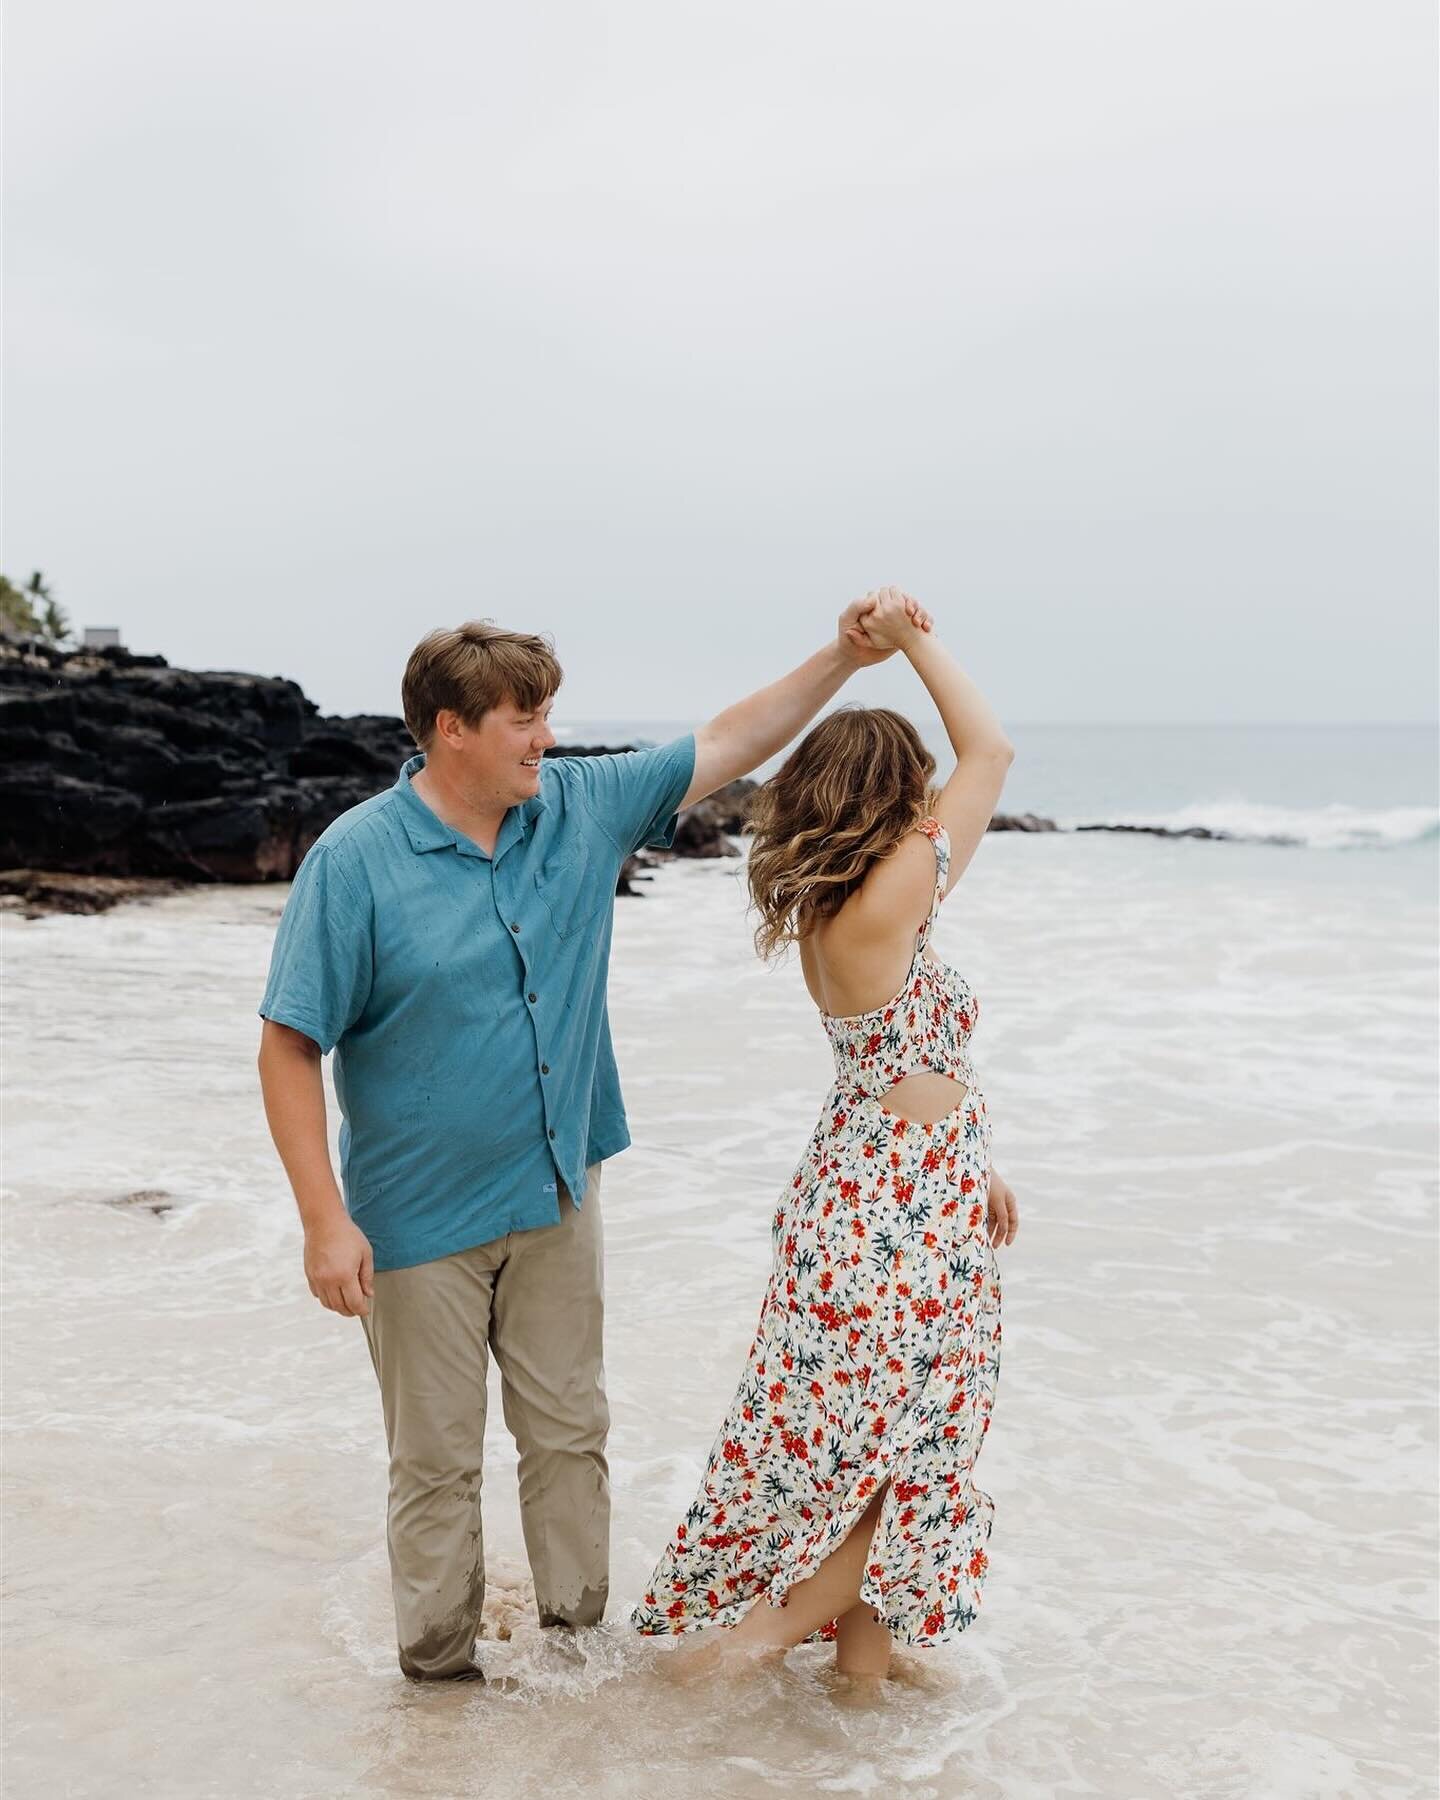 Mornings on the beach with Jenae &amp; Austin 🌊
.
.
.
.
.
.
#hawaiiphotographer #hawaiiengagement #hawaiiweddingphotographer #alaskaweddingphotographer #alaskaphotographer #engaged #beachengagementsession #engaged💍 #engagementphotos #2024bride #202